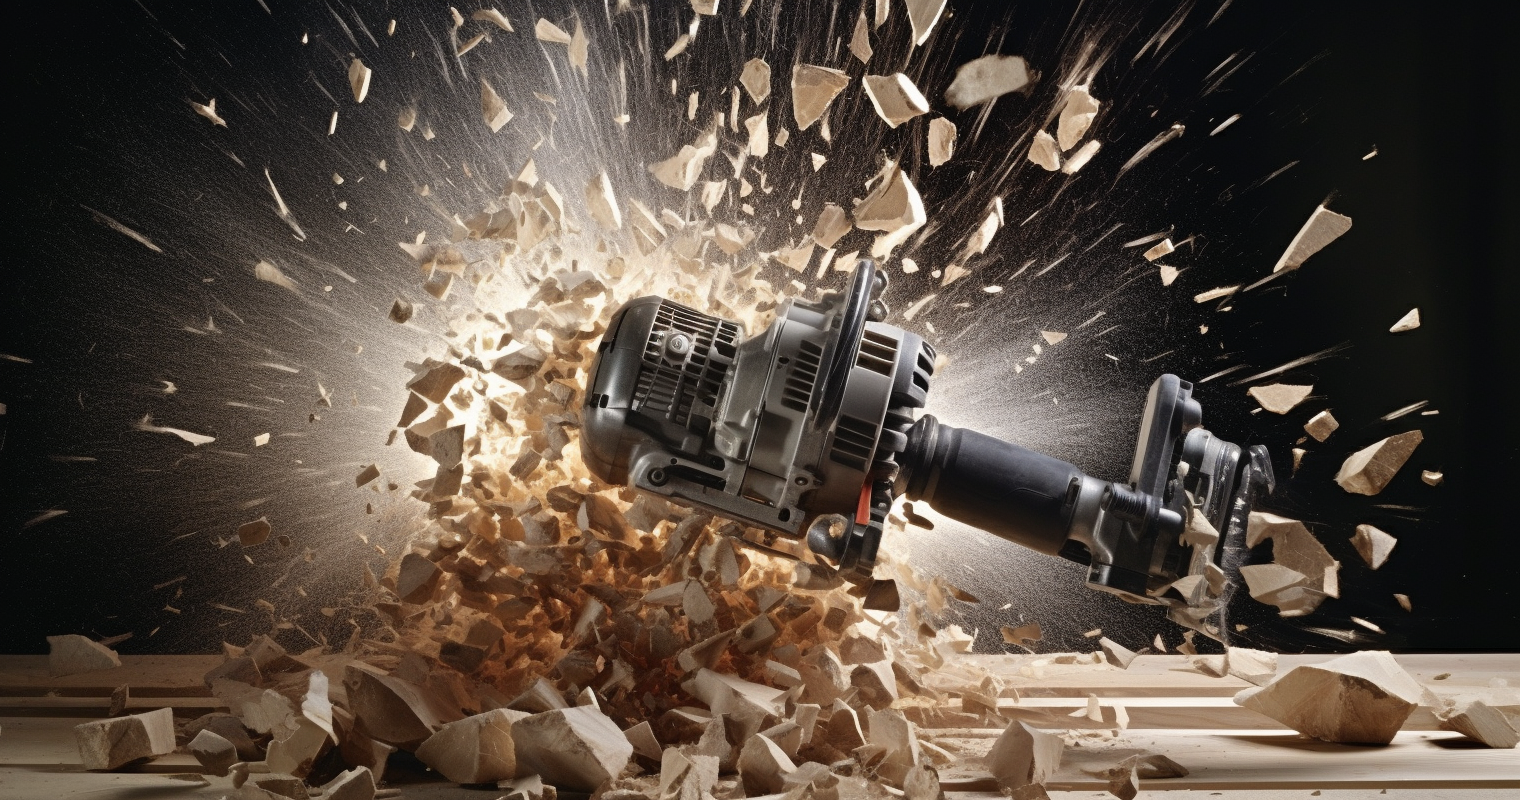 Bauer Cordless Drill in Action